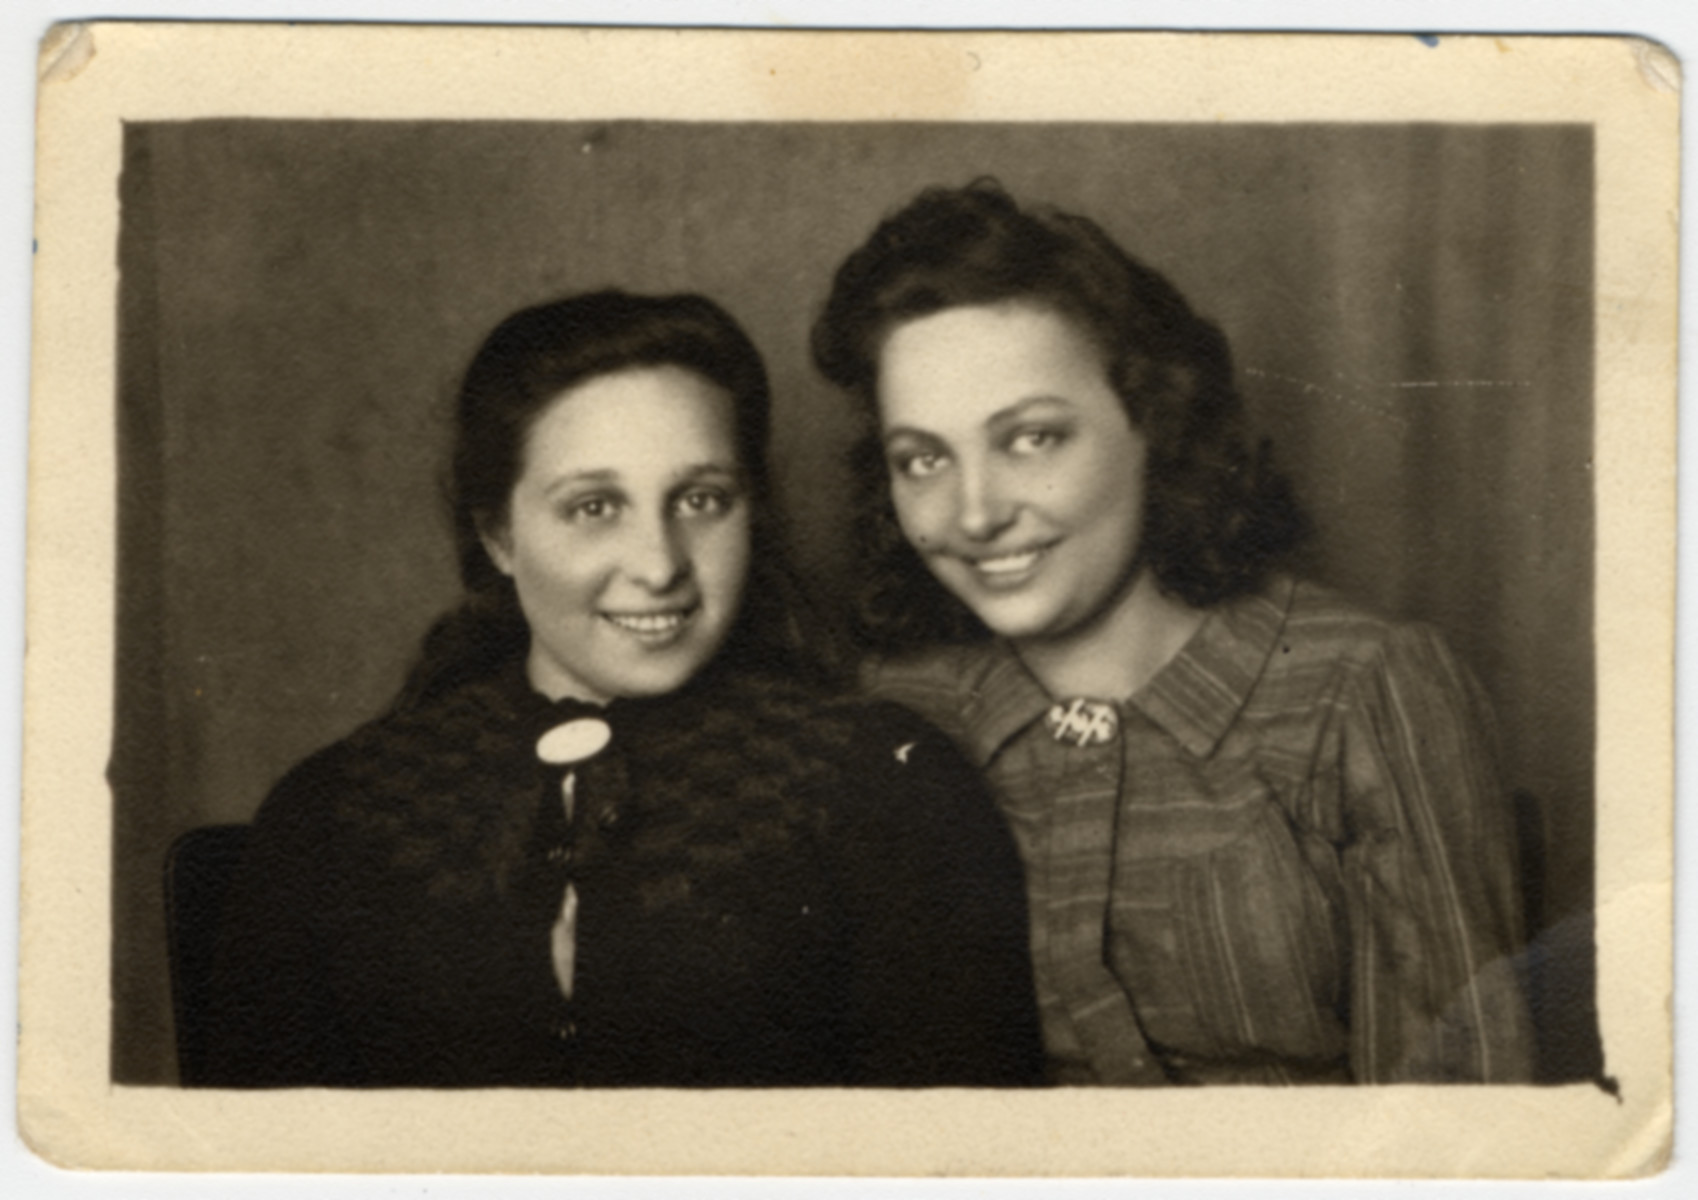 Postwar portrait of two of the few female Bielski partisans who carried weapons. 

Pictured are Esther (Essie) Shor (a cousin of the Bielski brothers) and Itka Ass.